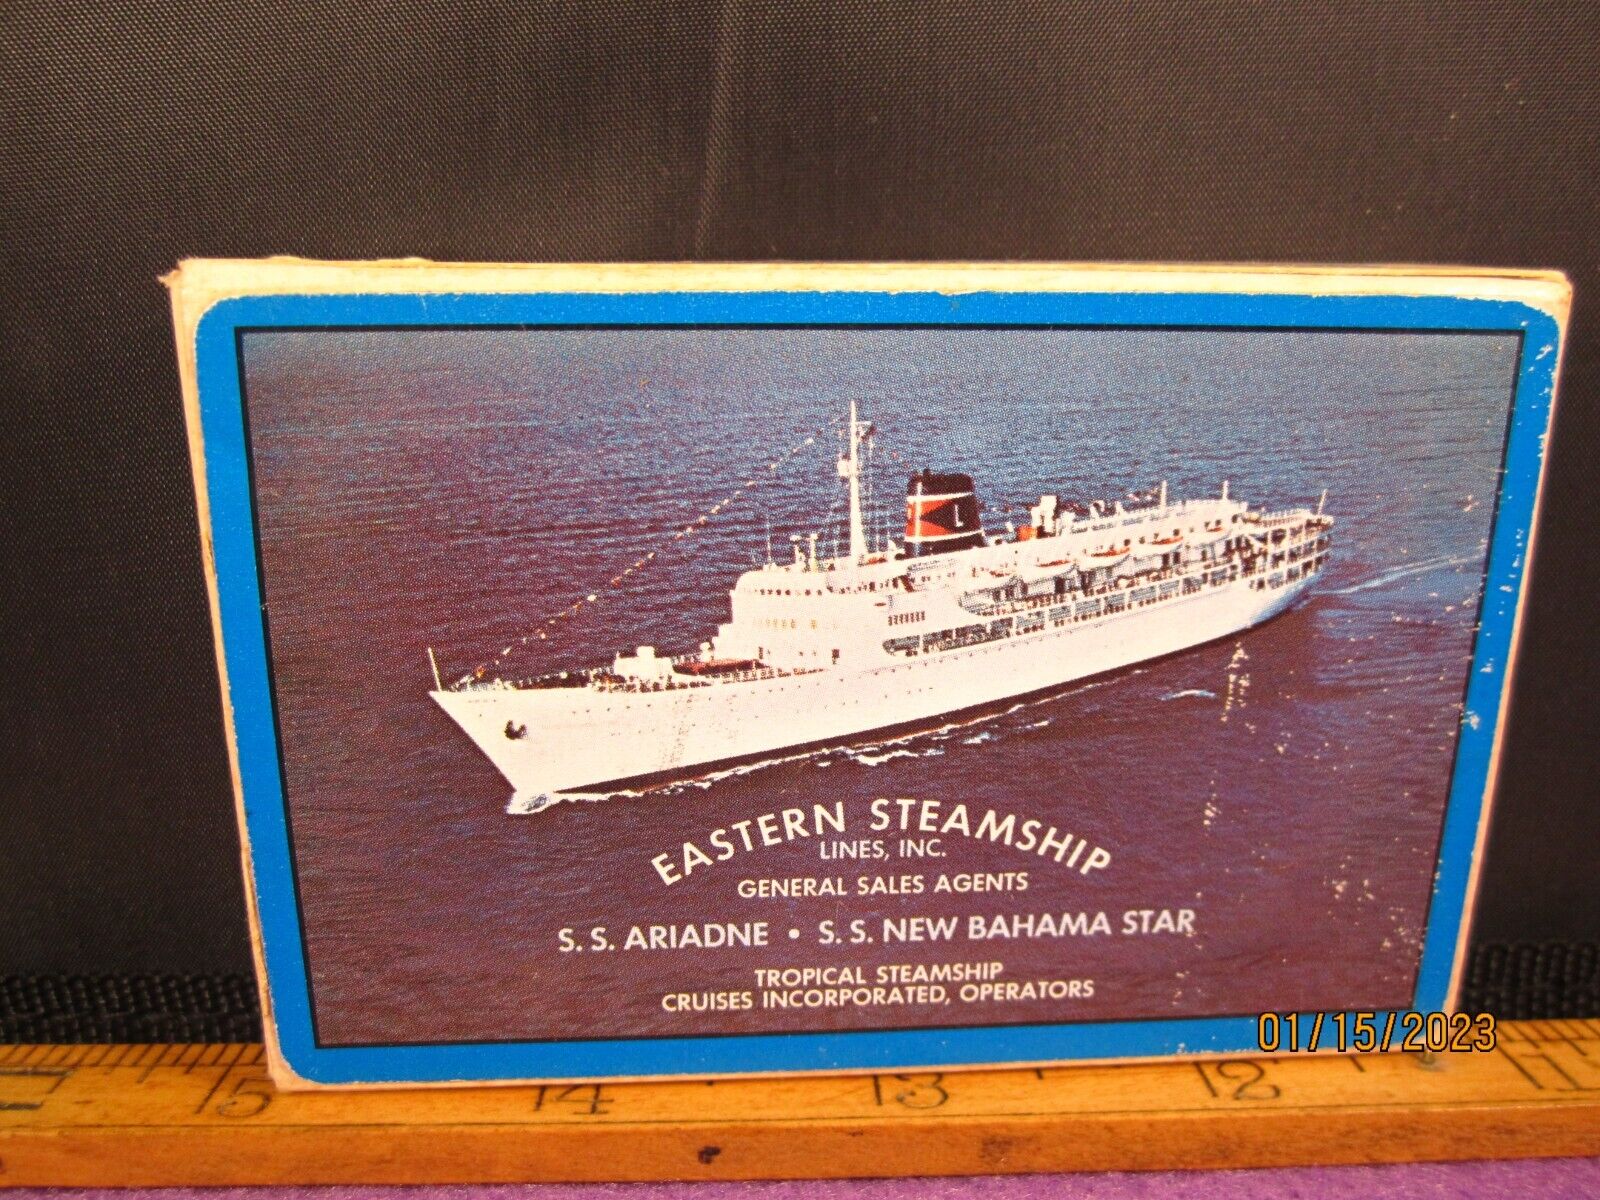 Eastern Steamship Lines S S Ariadne S S Bahama Star Single deck of playing cards